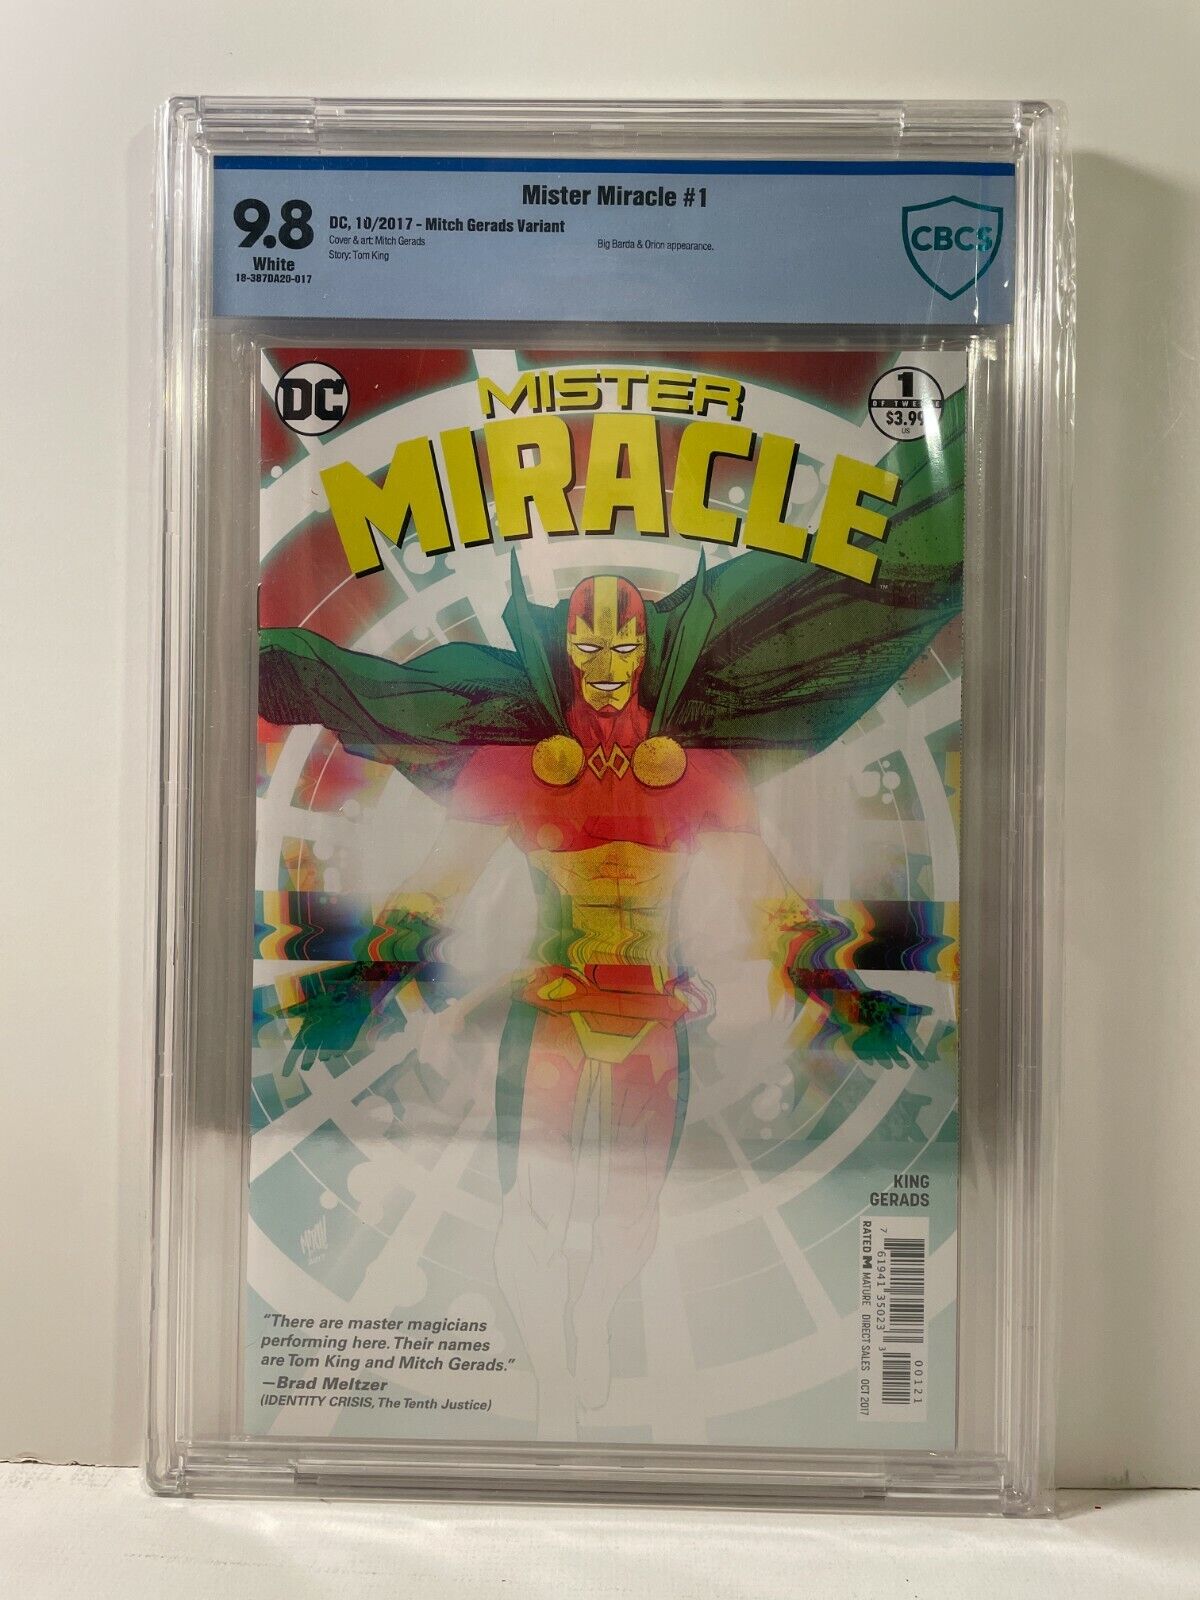 Mister Miracle #1 9.8 CBCS Mitch Gerads Variant Cover Tom King 2017